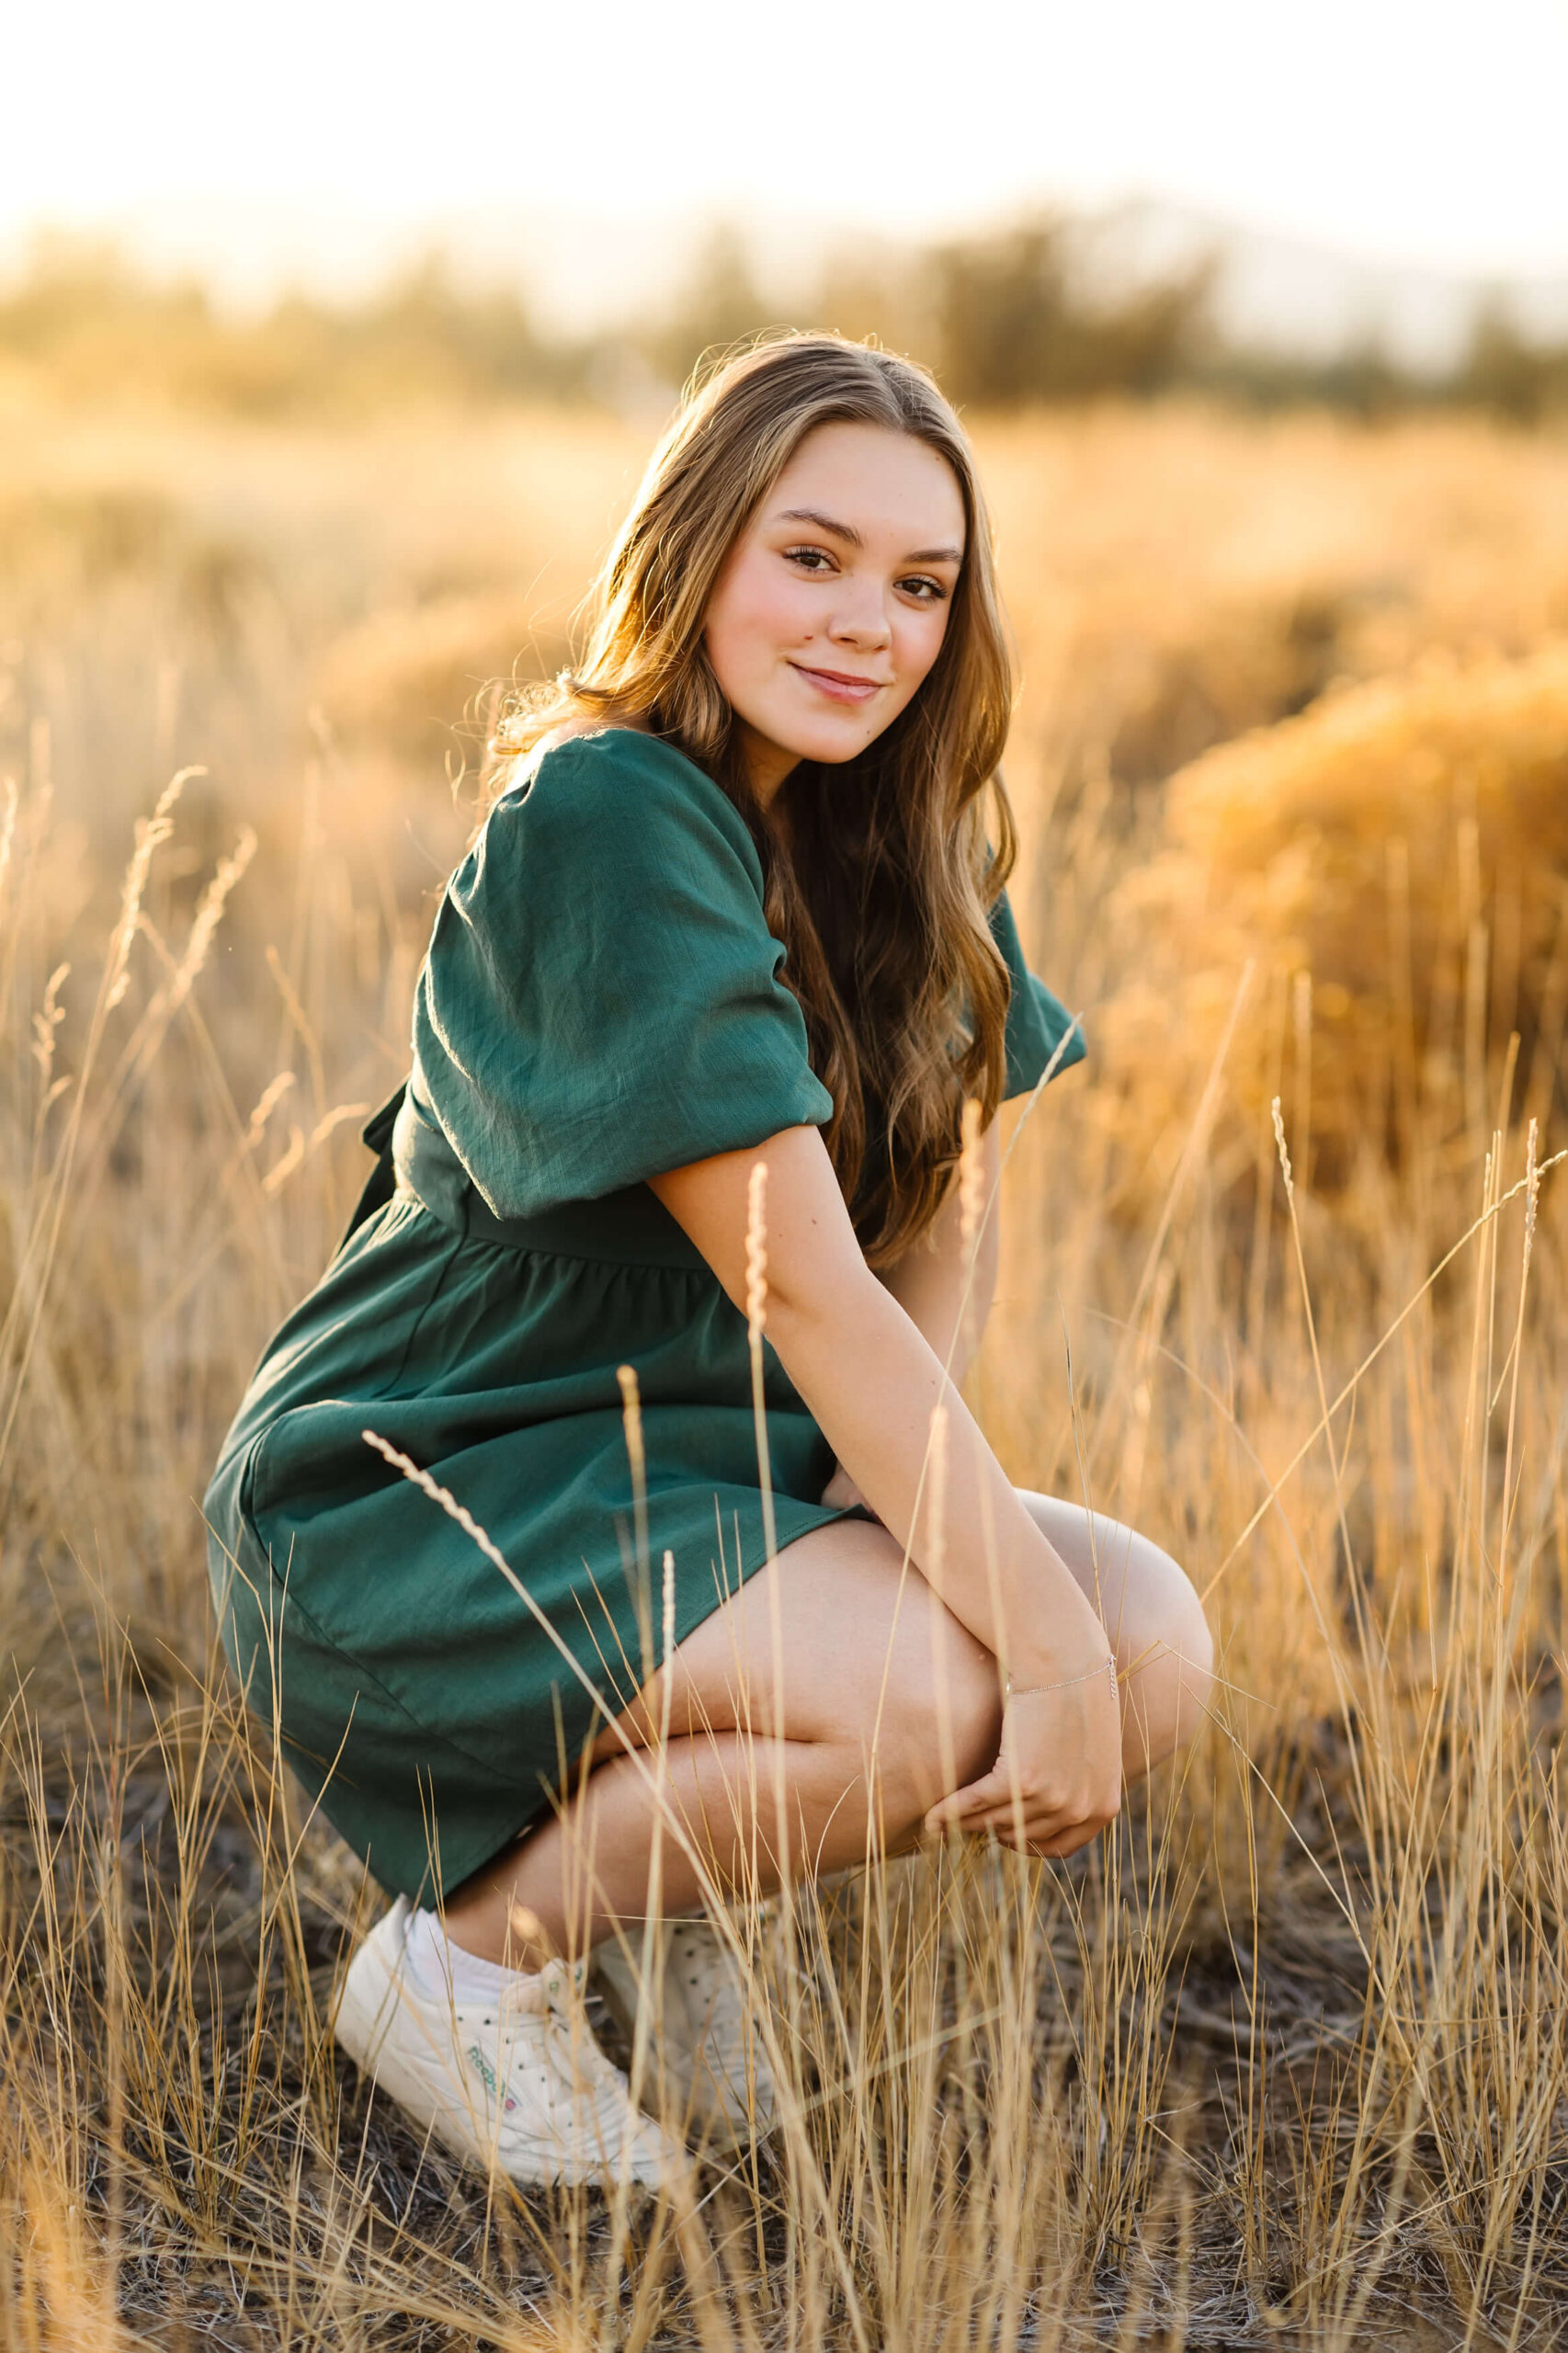 a girl with caramel color hair kneeling in tall grass field during golden hour senior photos session in bend oregon